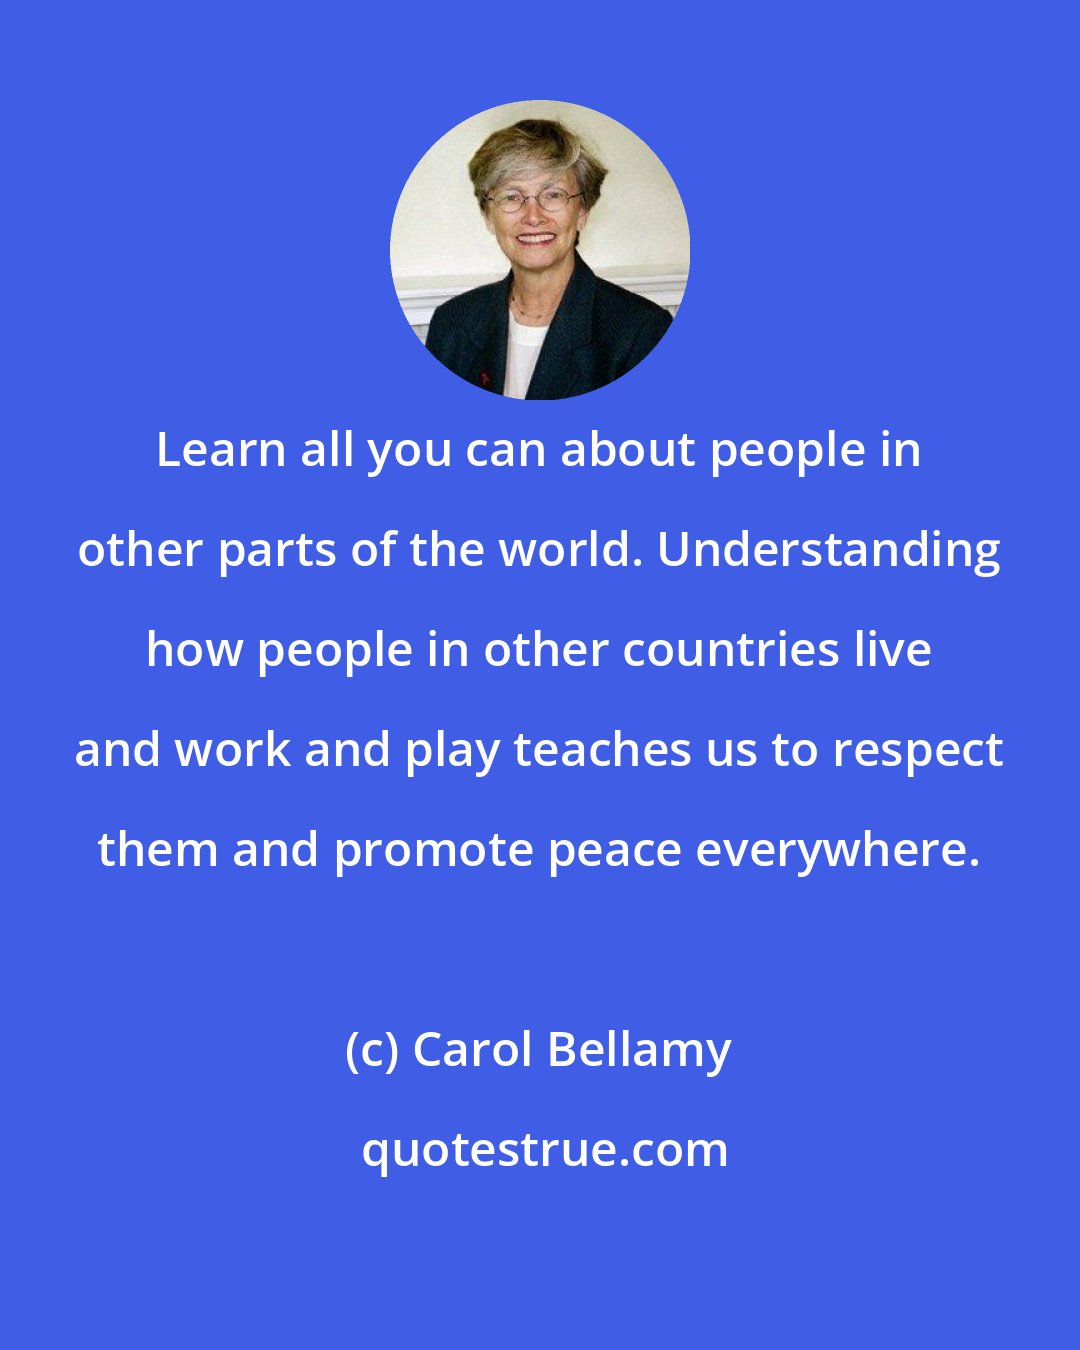 Carol Bellamy: Learn all you can about people in other parts of the world. Understanding how people in other countries live and work and play teaches us to respect them and promote peace everywhere.